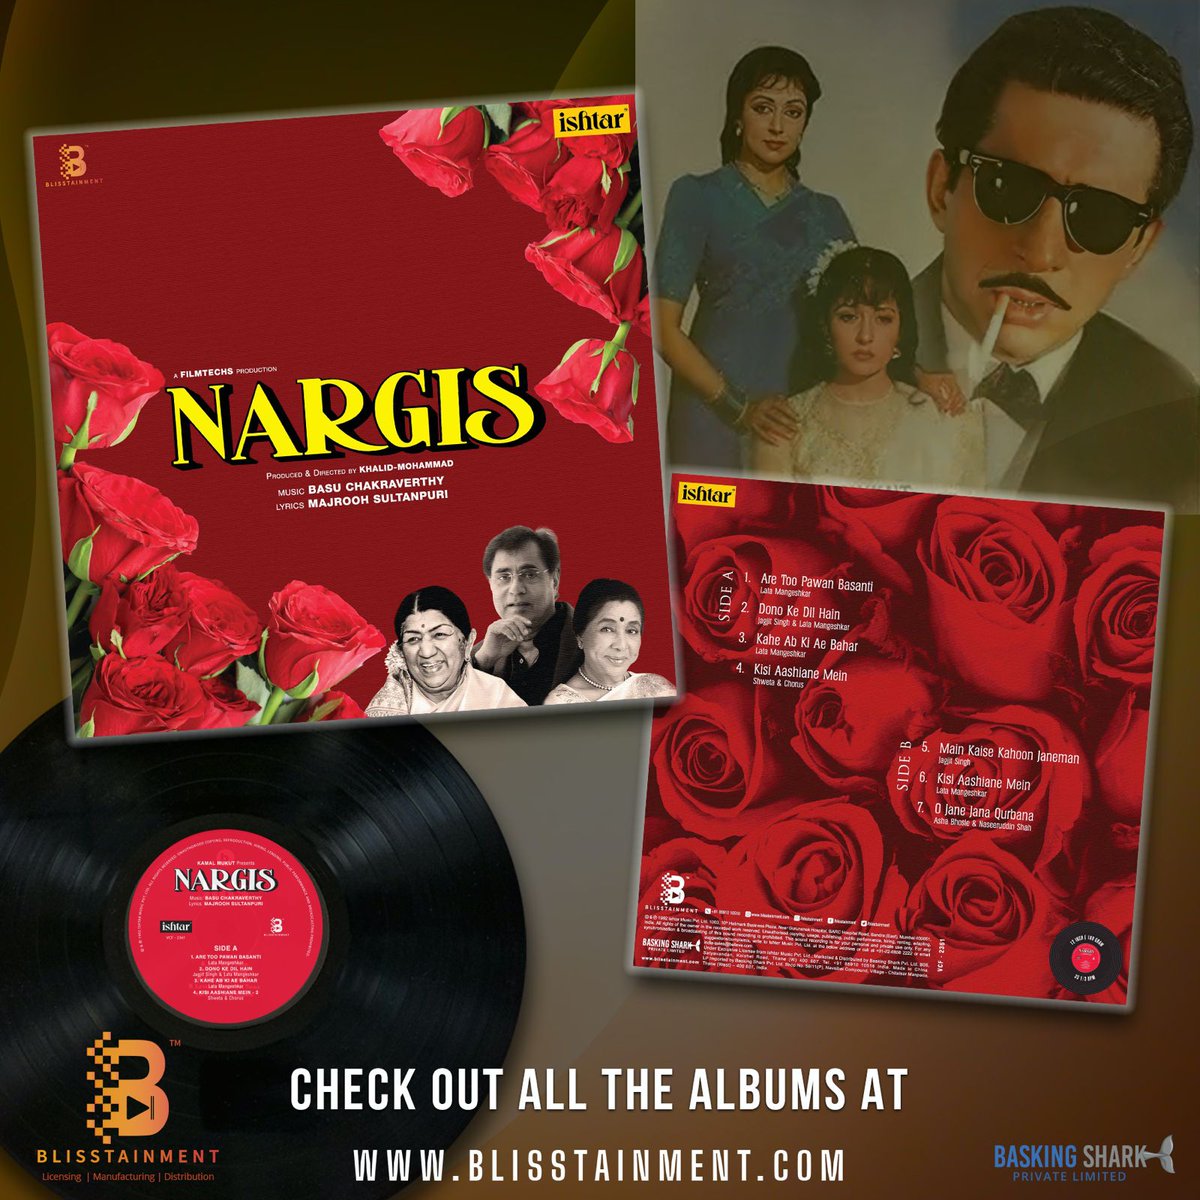 Dive into the nostalgia with the songs of 'Nargis' 🎶
Explore now! Link in bio

#Nargis #vinylcollectors #vinylcollector #vinylrecords #vinyl